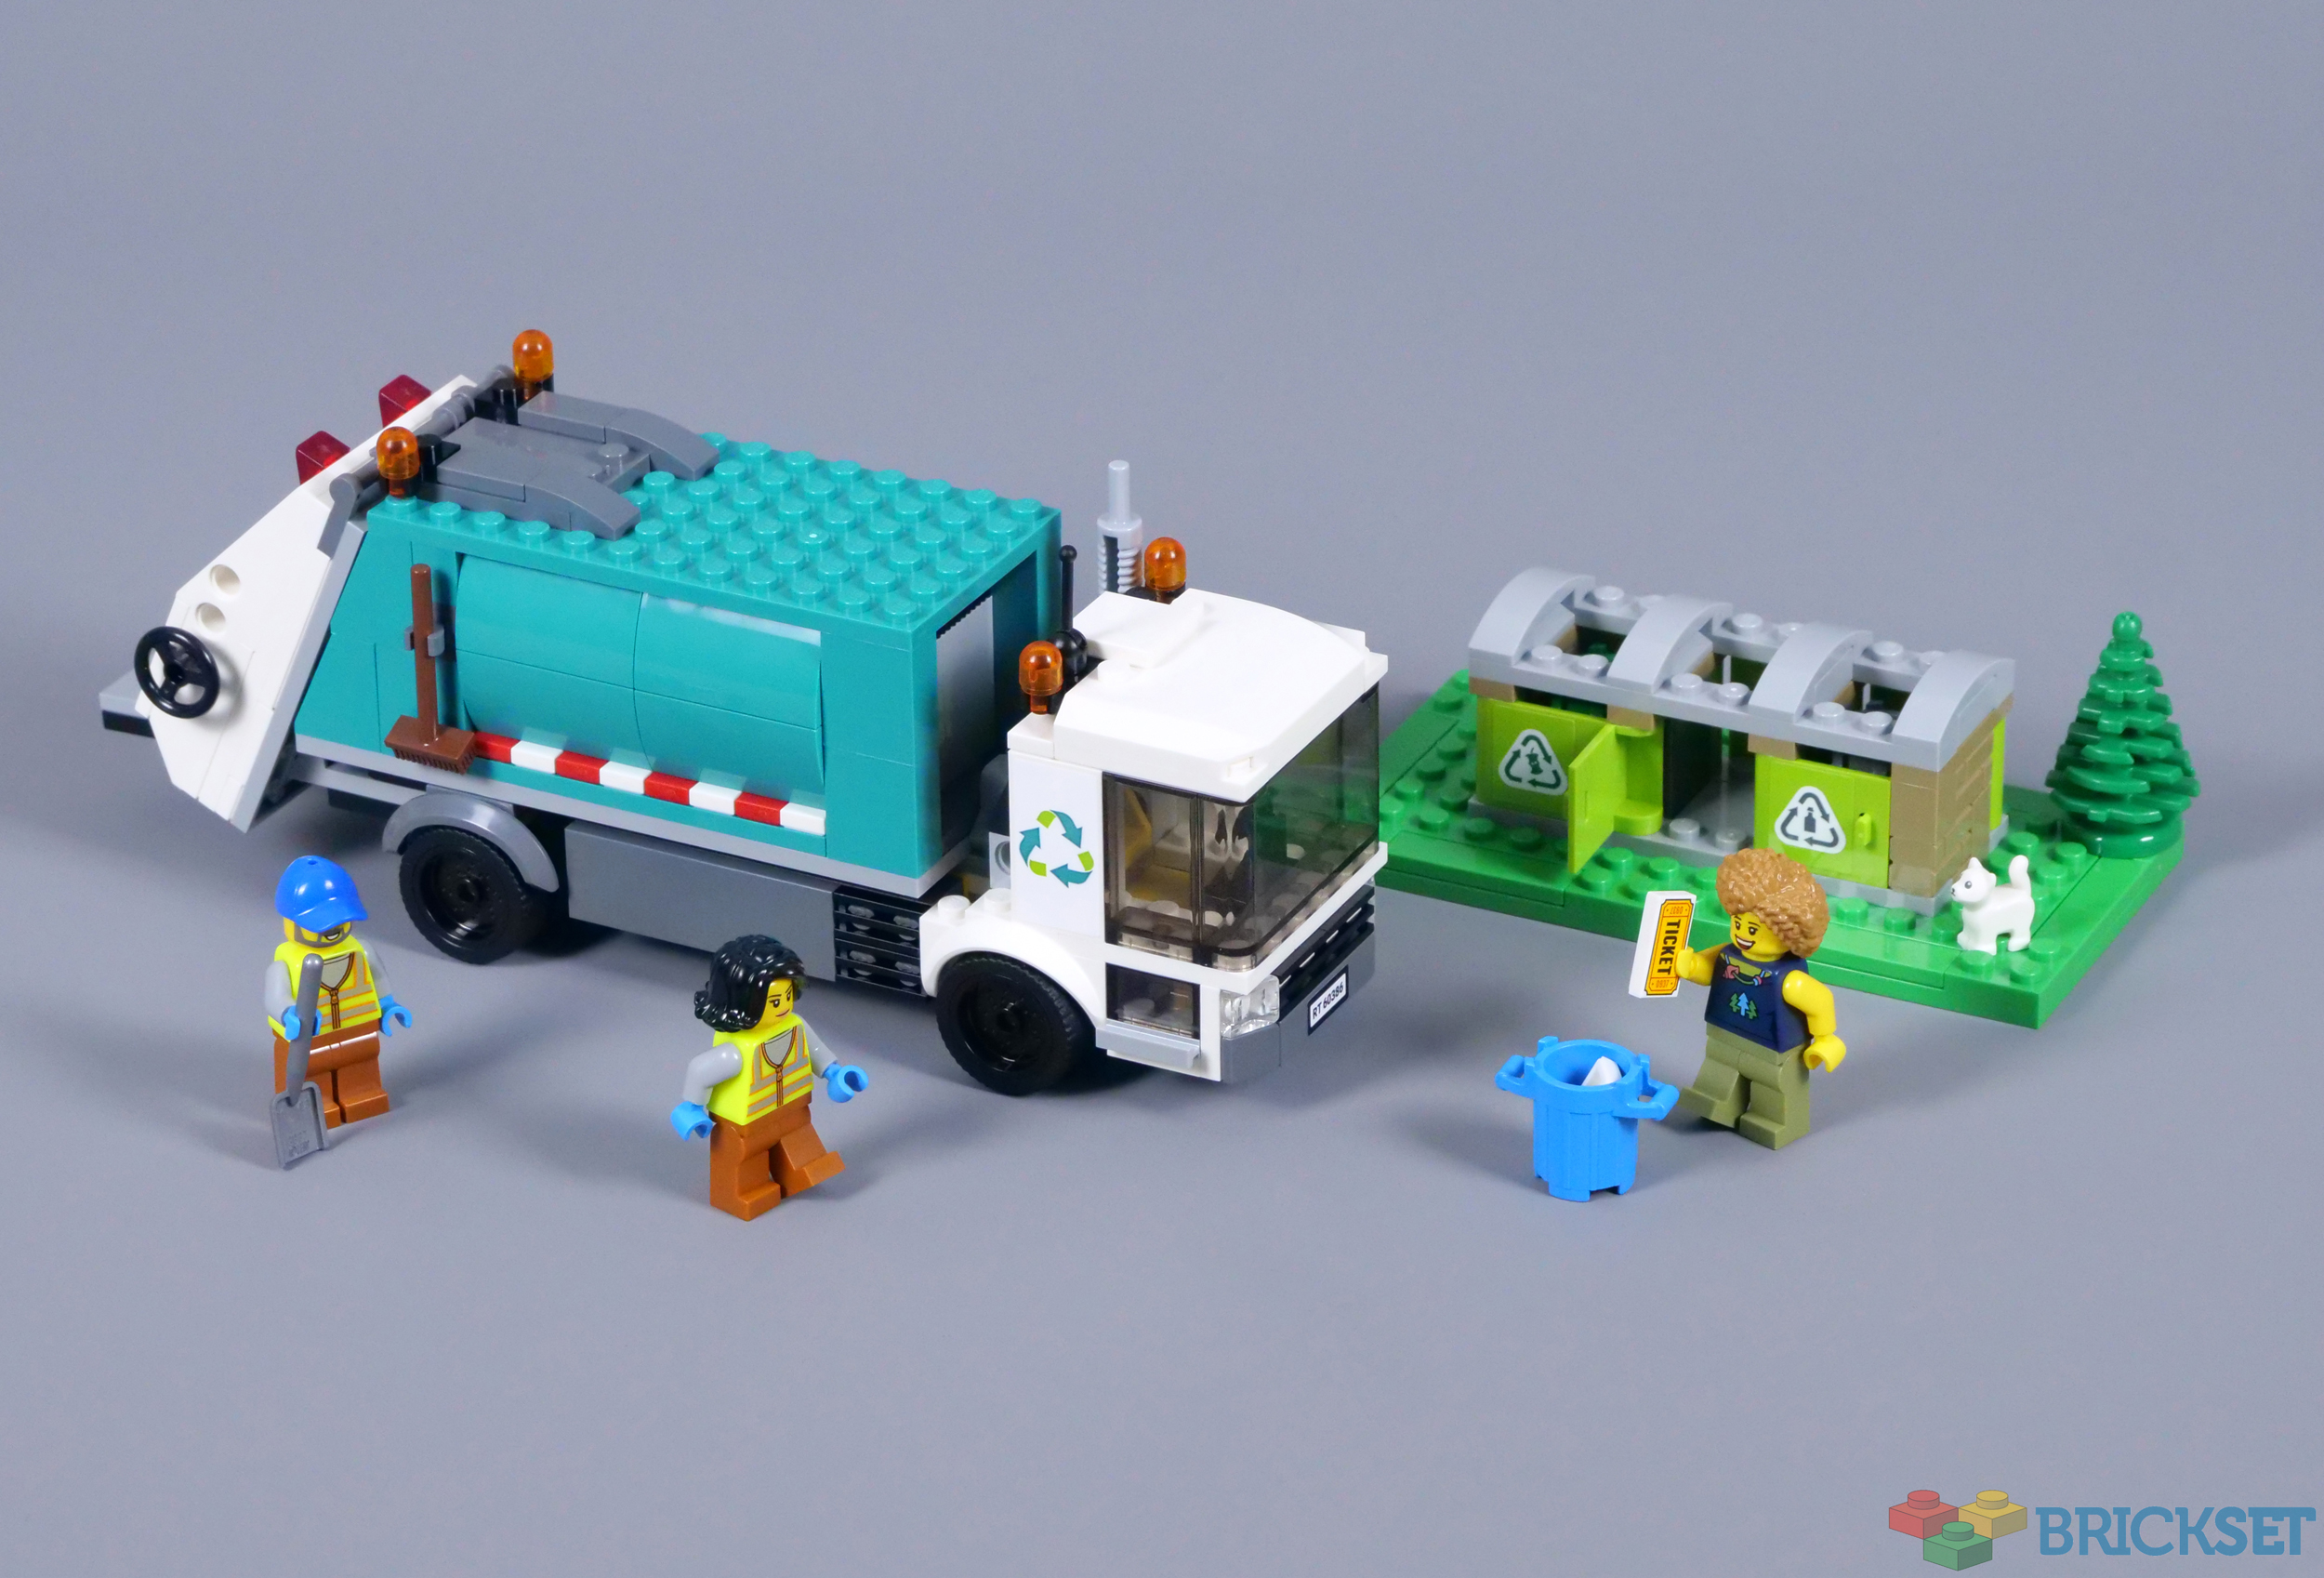 Brickset LEGO review 60386 Truck Recycling |